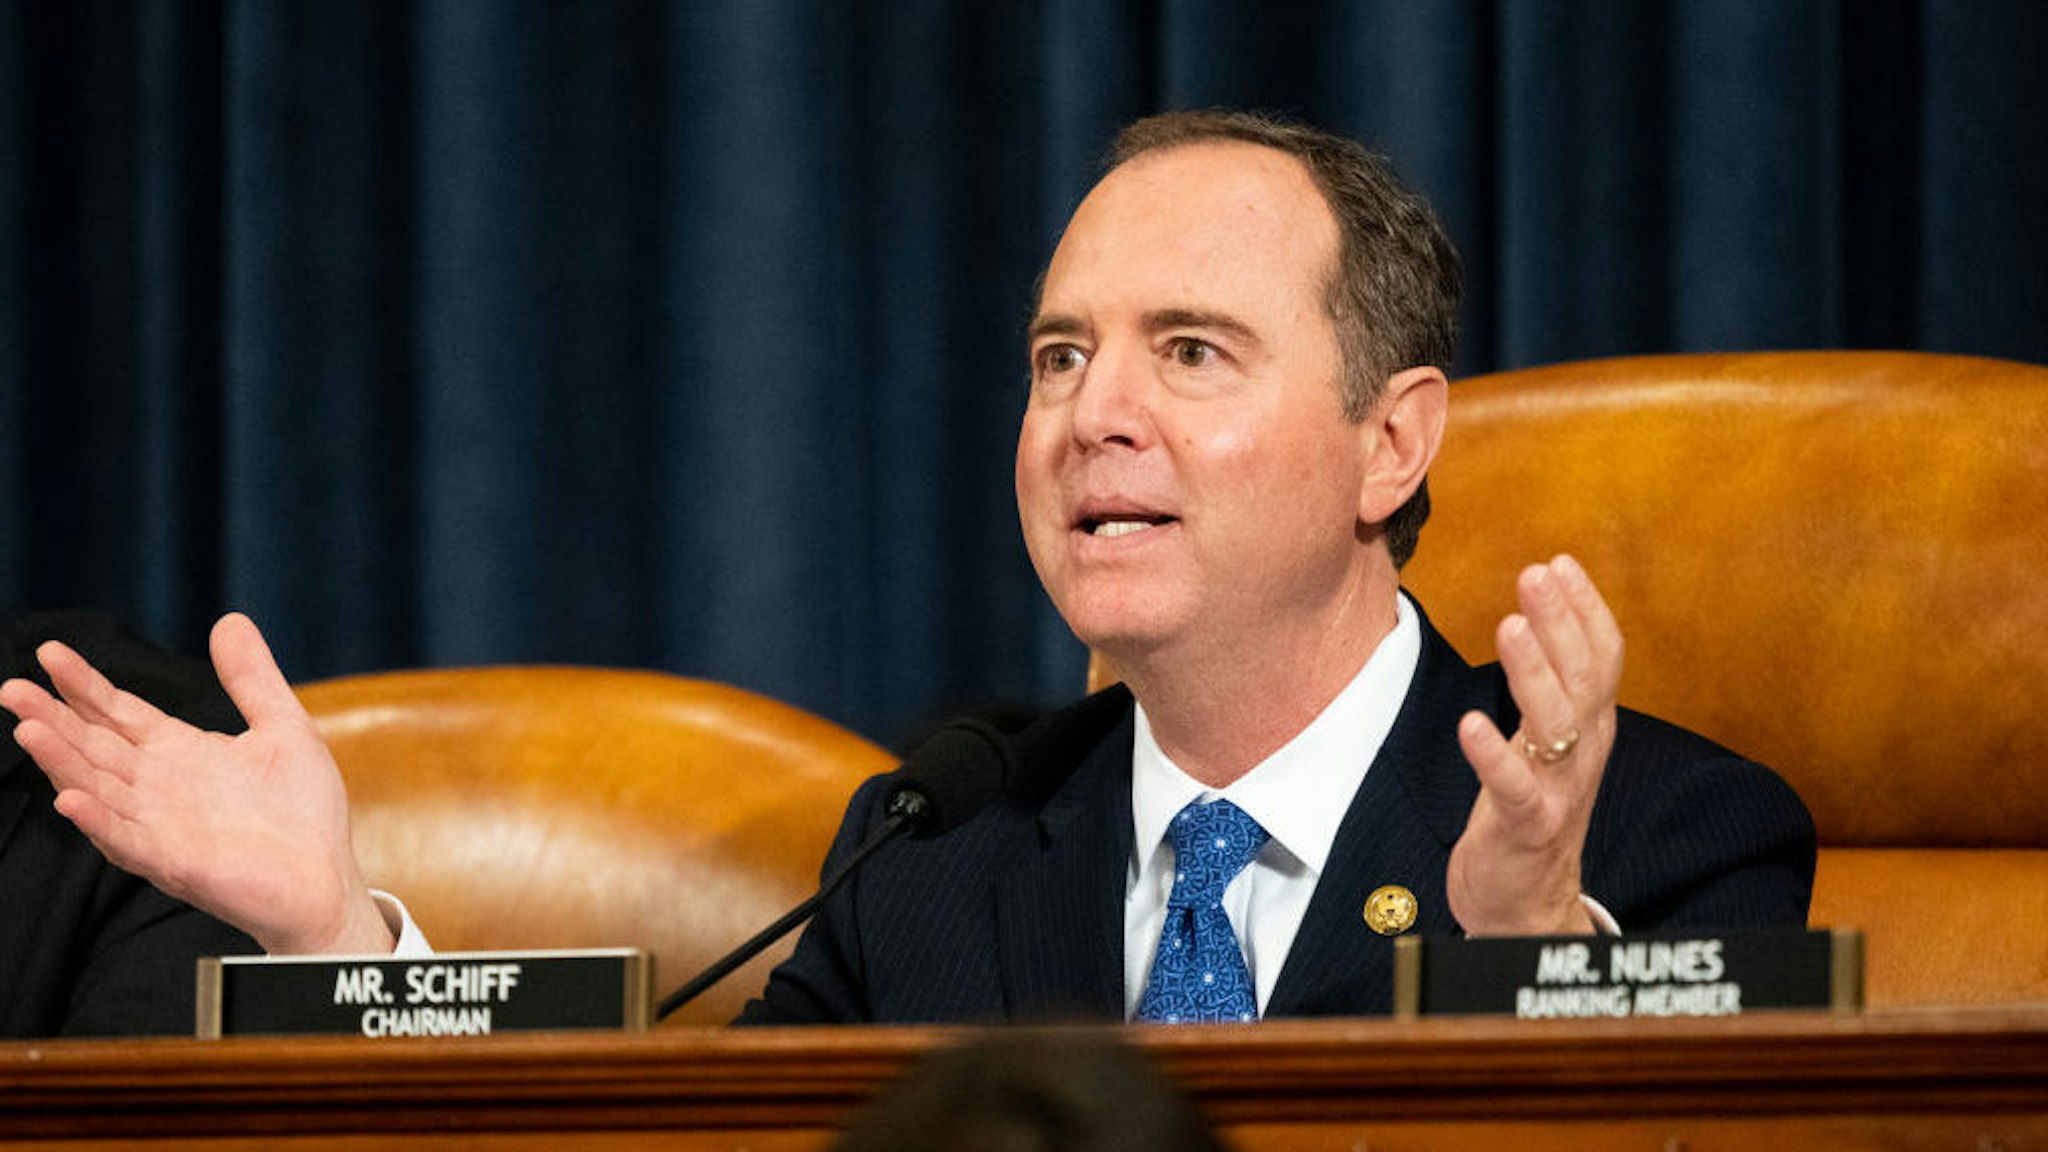 WASHINGTON, D.C., UNITED STATES - NOVEMBER 21 2019: U.S. Representative Adam Schiff (D-CA) attends the Open Hearings on the Impeachment of President Donald Trump of the House Intelligence Committee in Washington.